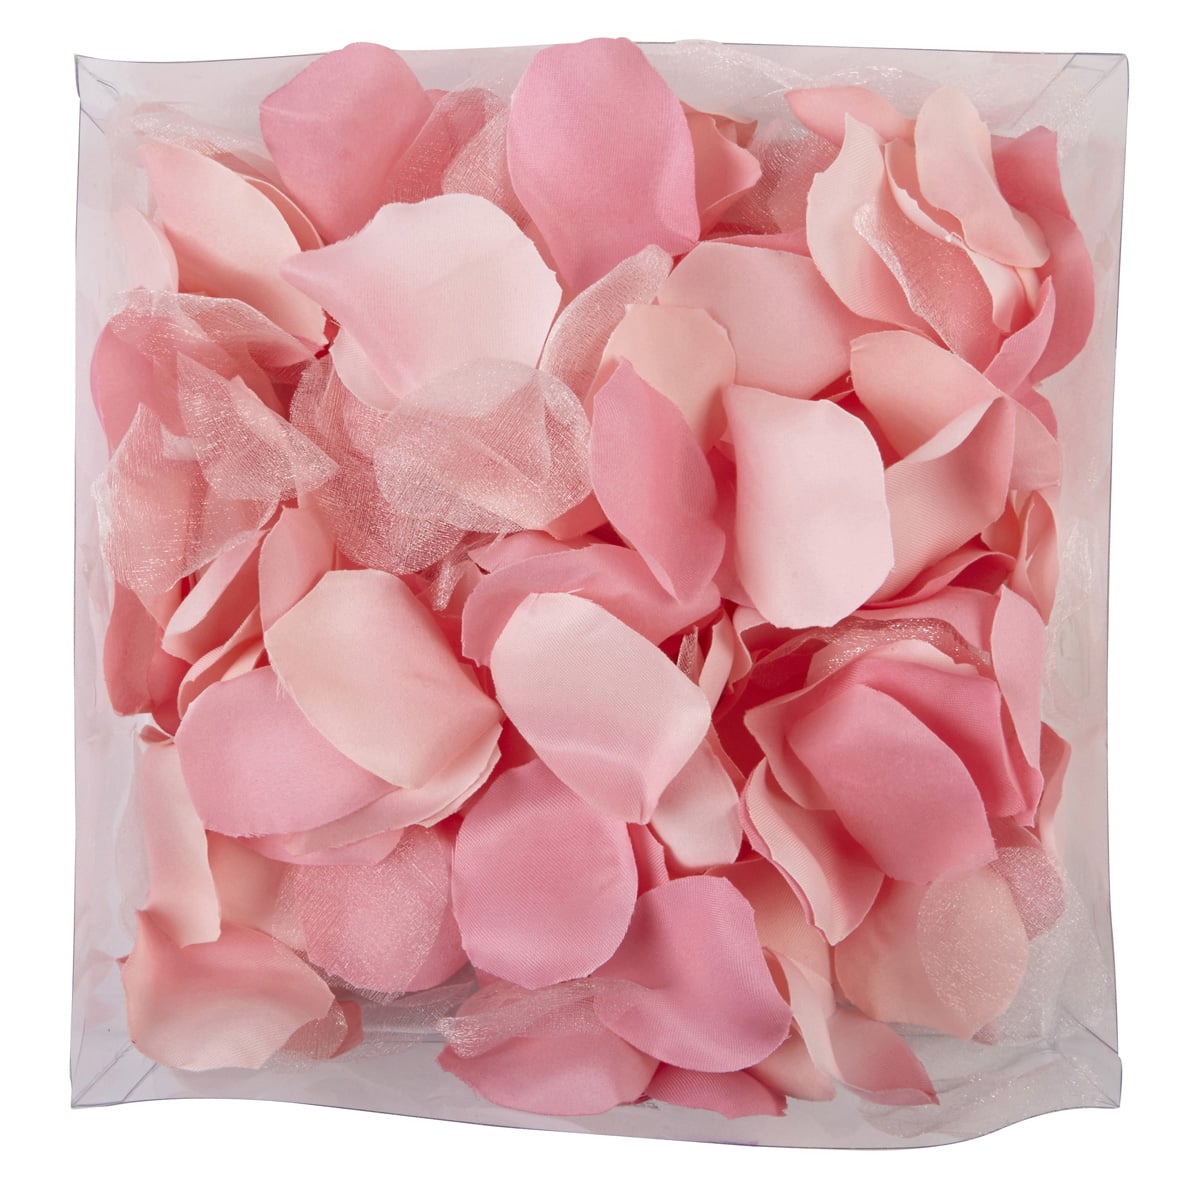 12 Pack: Occasions Pink Decorative Rose Petals by Celebrate It™